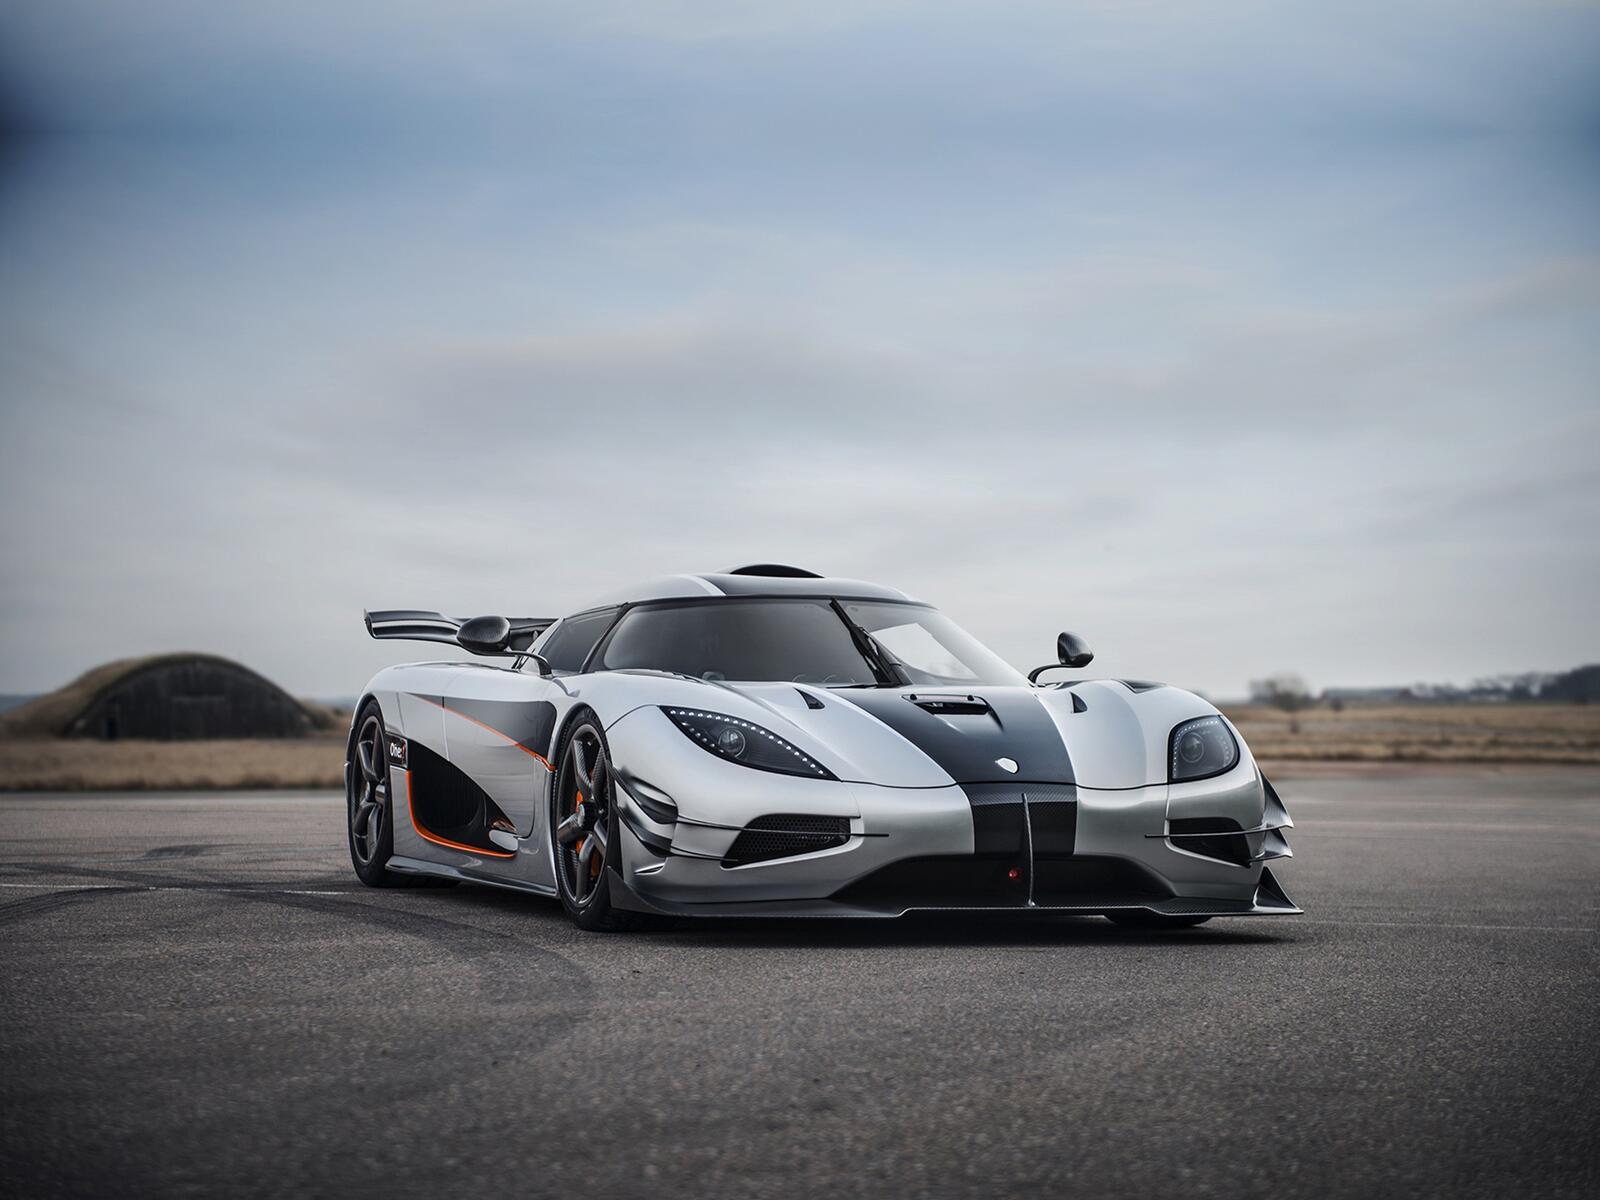 Free photo A gray koenigsegg agera with a black stripe on the hood